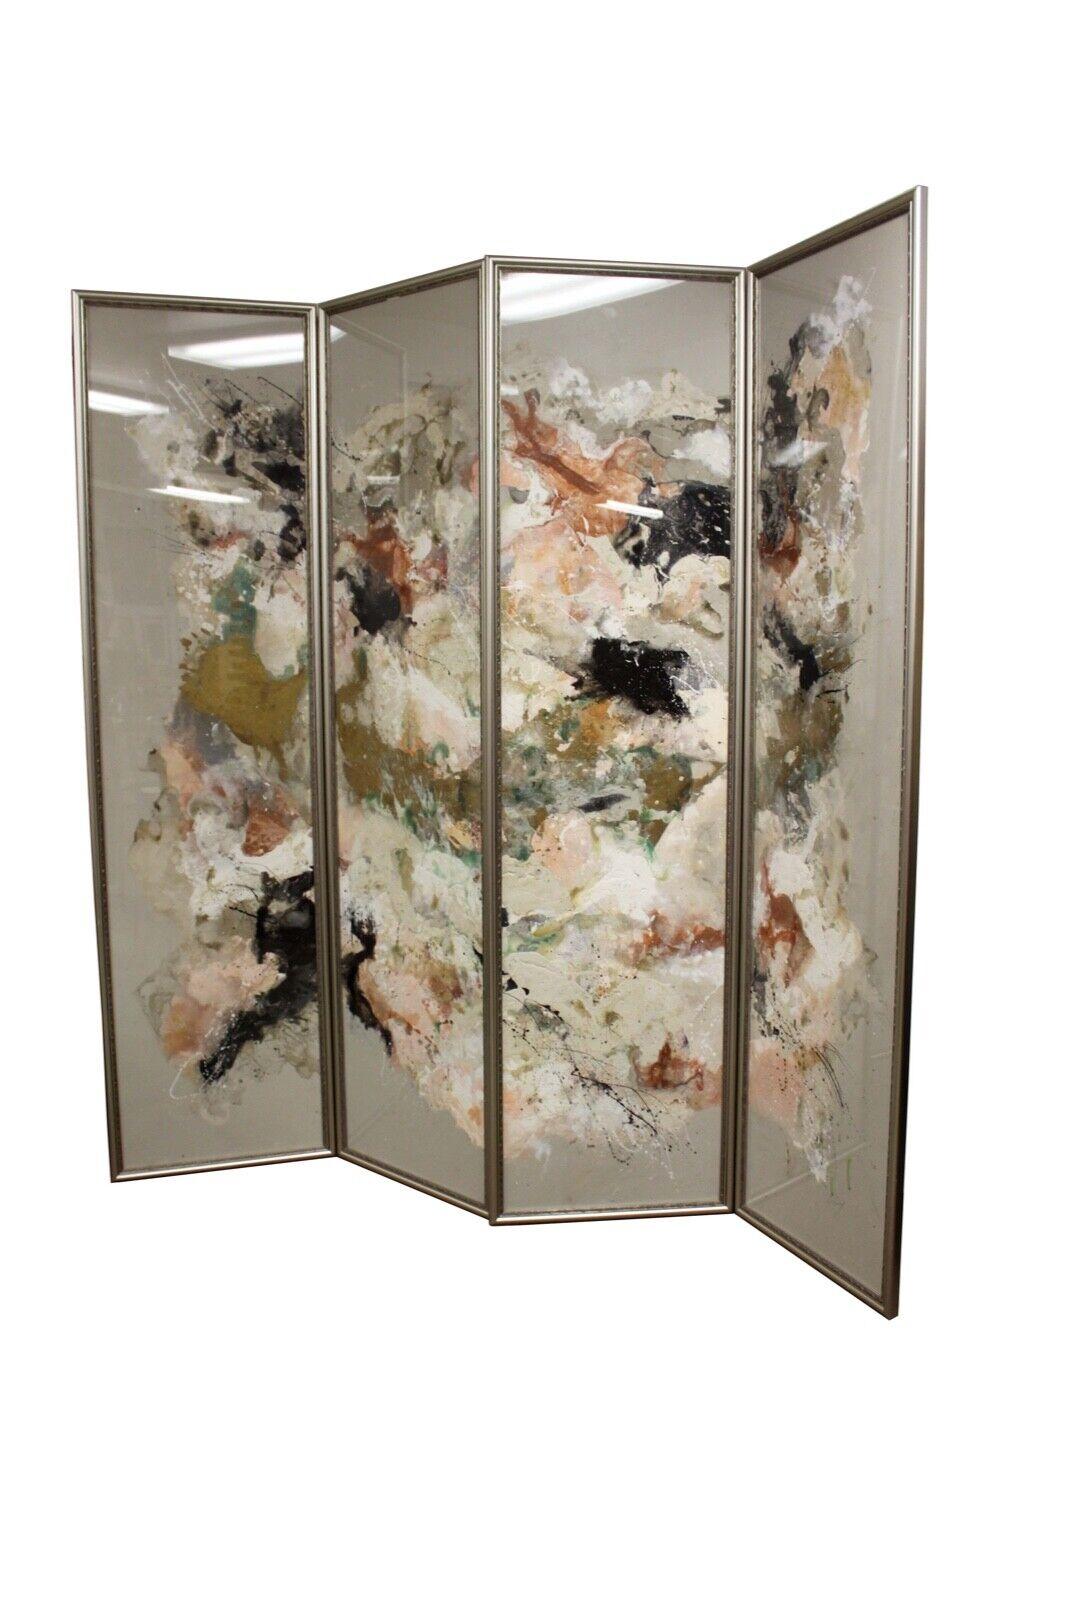 A unique contemporary 4 panel room divider hand-crafted by Michigan-based artist Barbara Coburn. Each panel is a one-of-a-kind painting abstract painting on paper that is framed under glass with a delicate metal frame. The subtle floral abstract